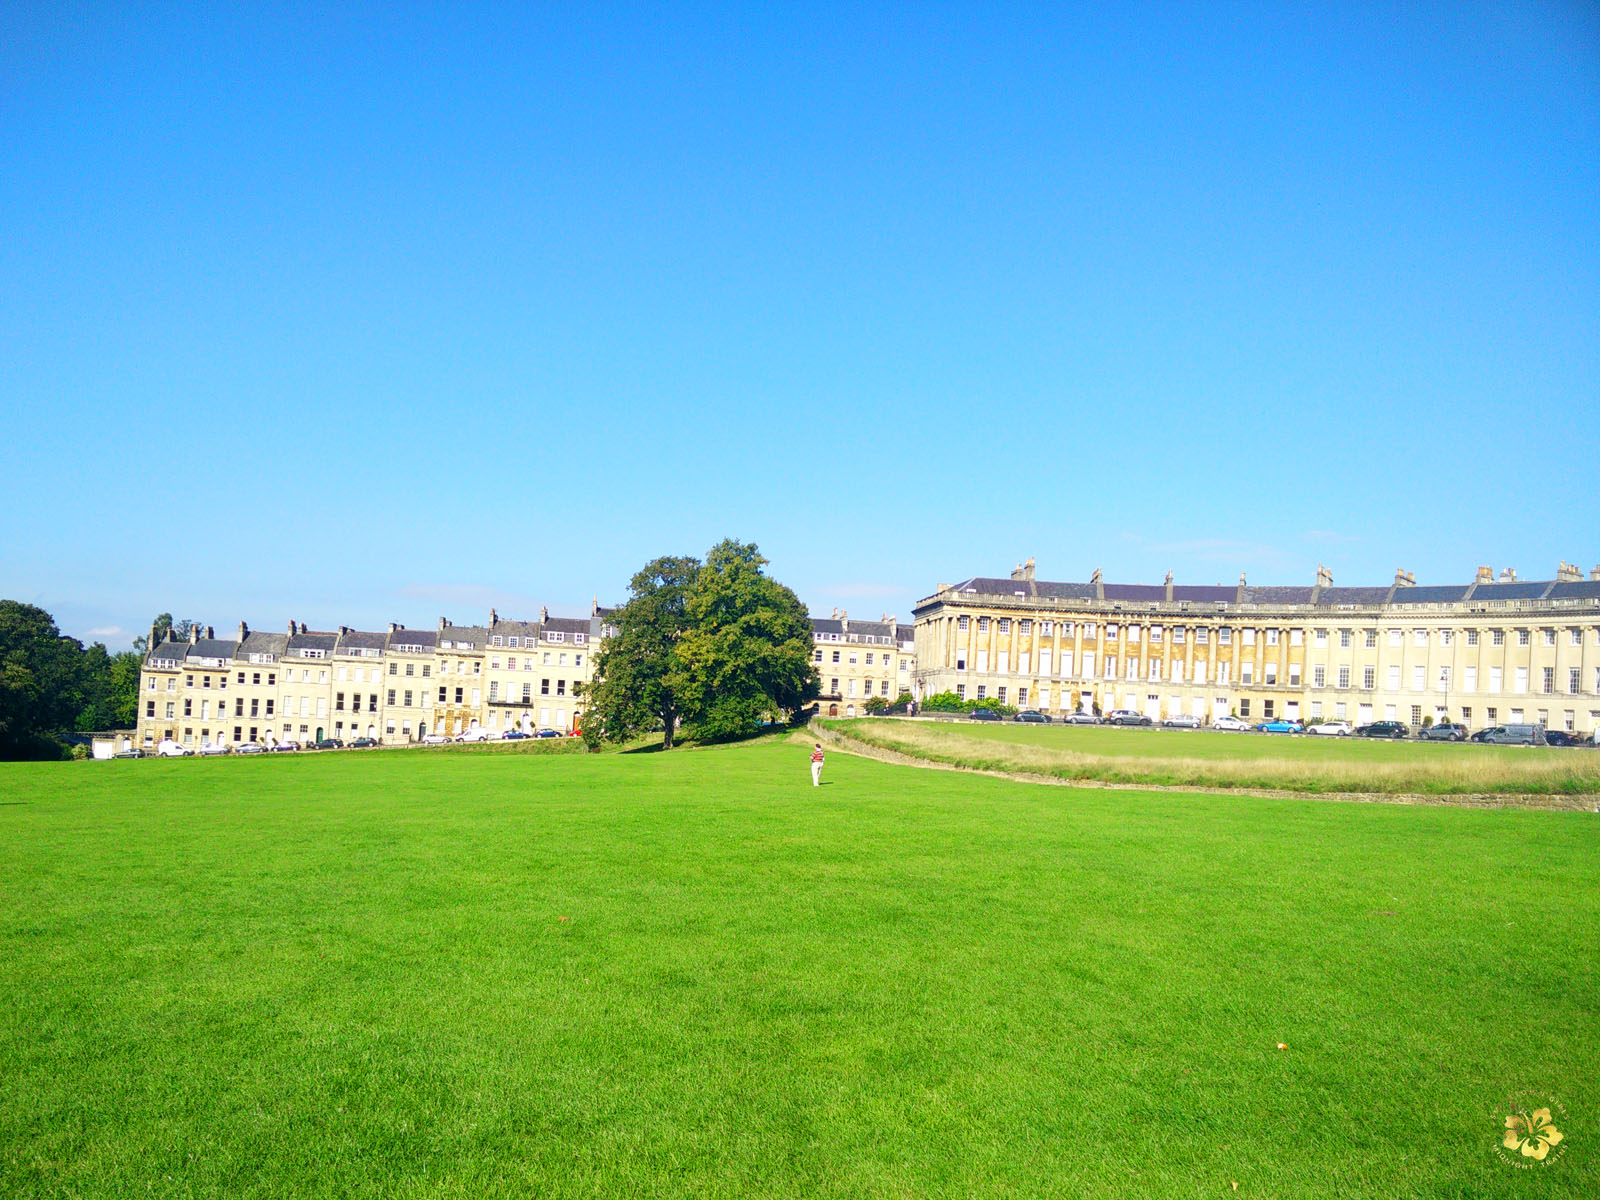 Part of the Royal Crescent